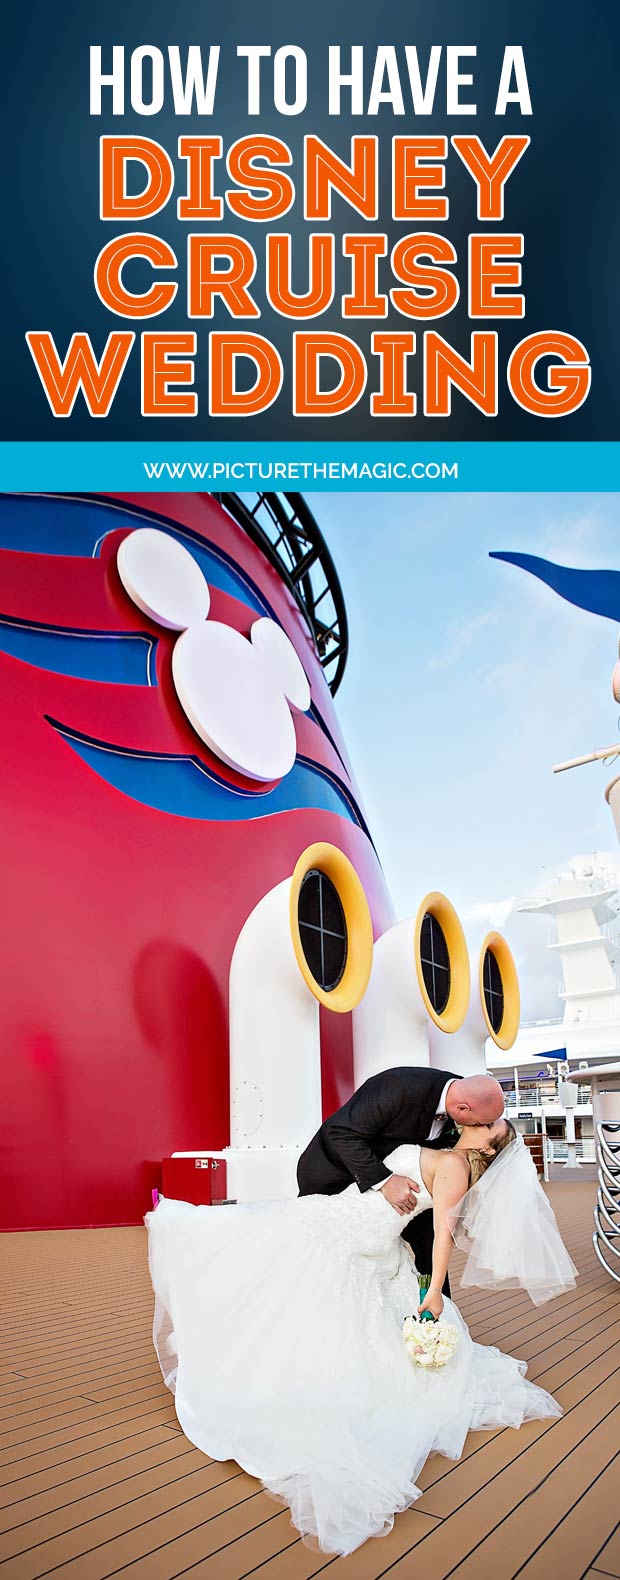 How to Have a Disney Cruise Wedding